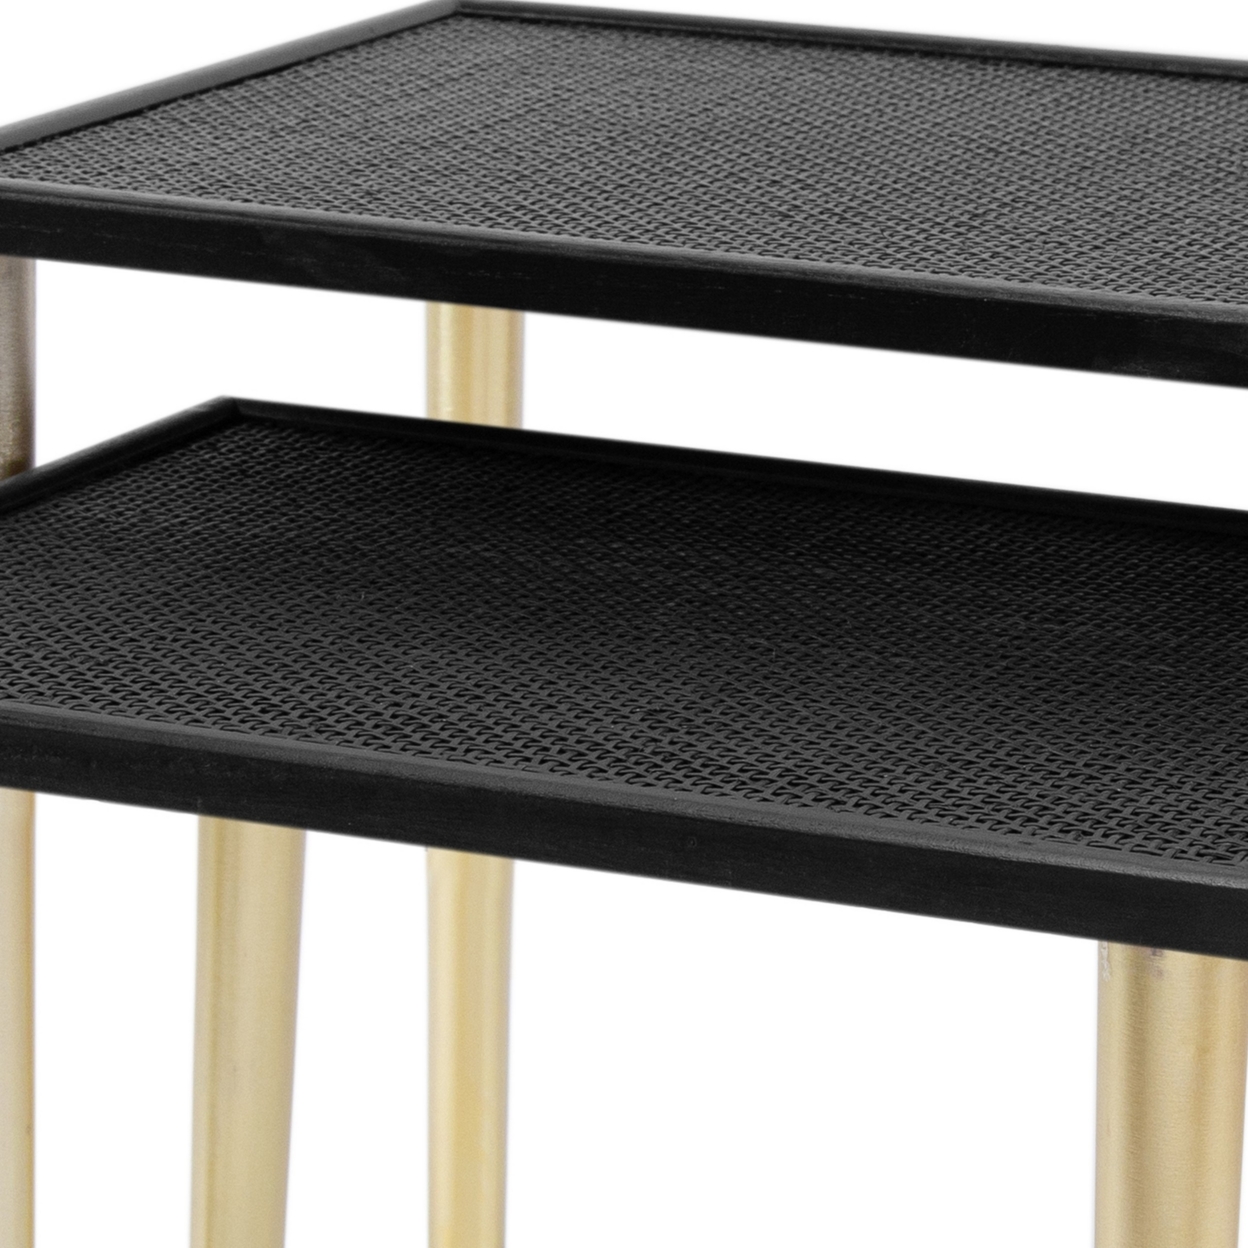 17, 19, 21 Inch Set Of 3 Nesting Accent Tables, Pine Wood, Black And Gold- Saltoro Sherpi